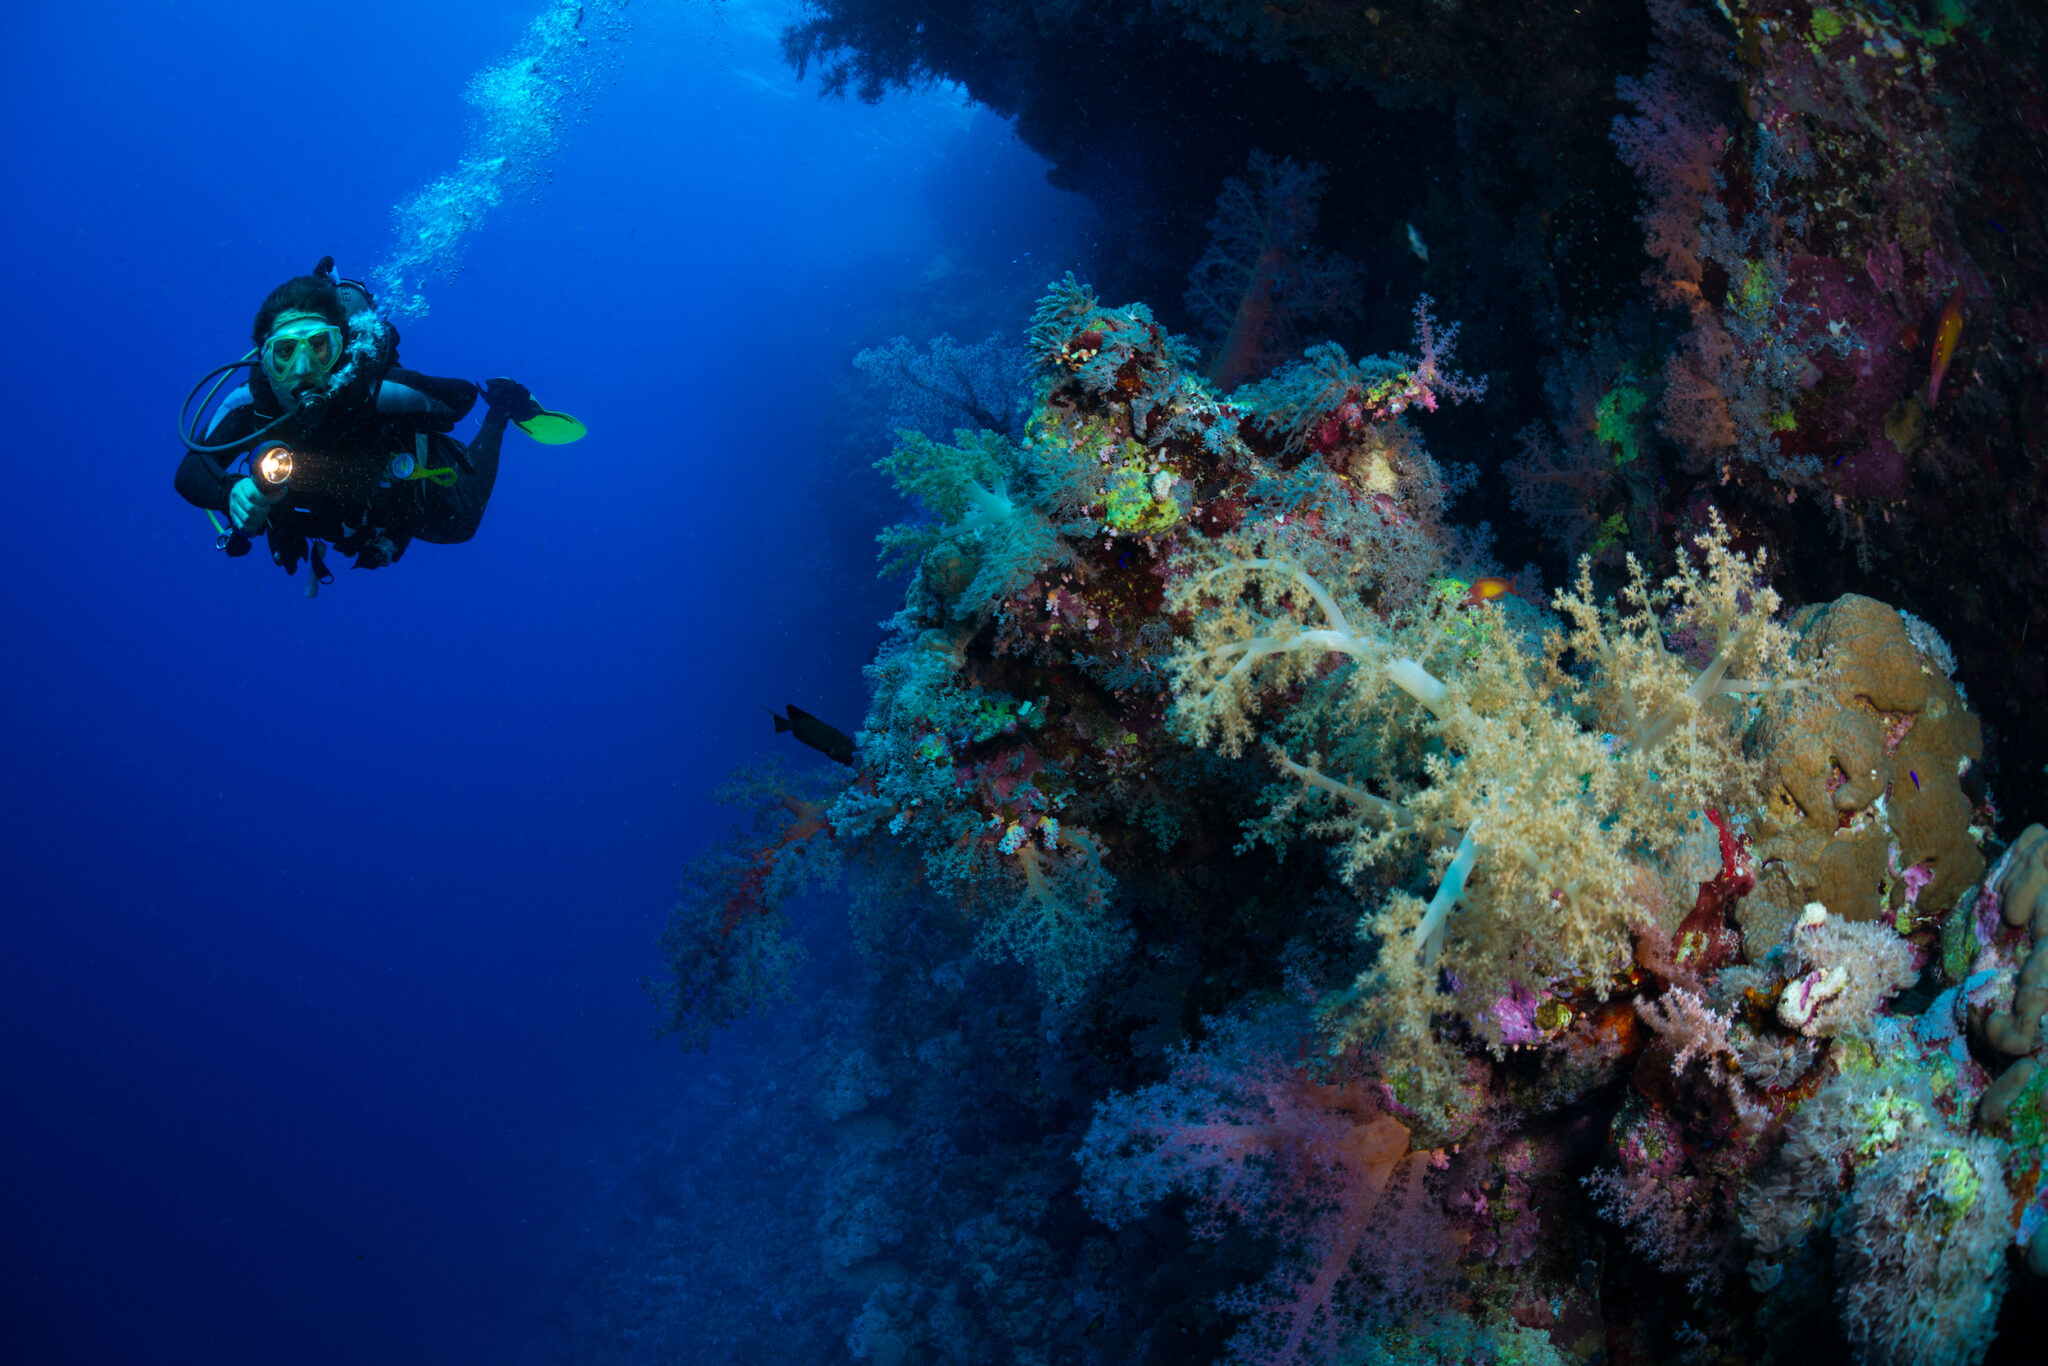 A scuba diver shines a light on a coral reef underwater